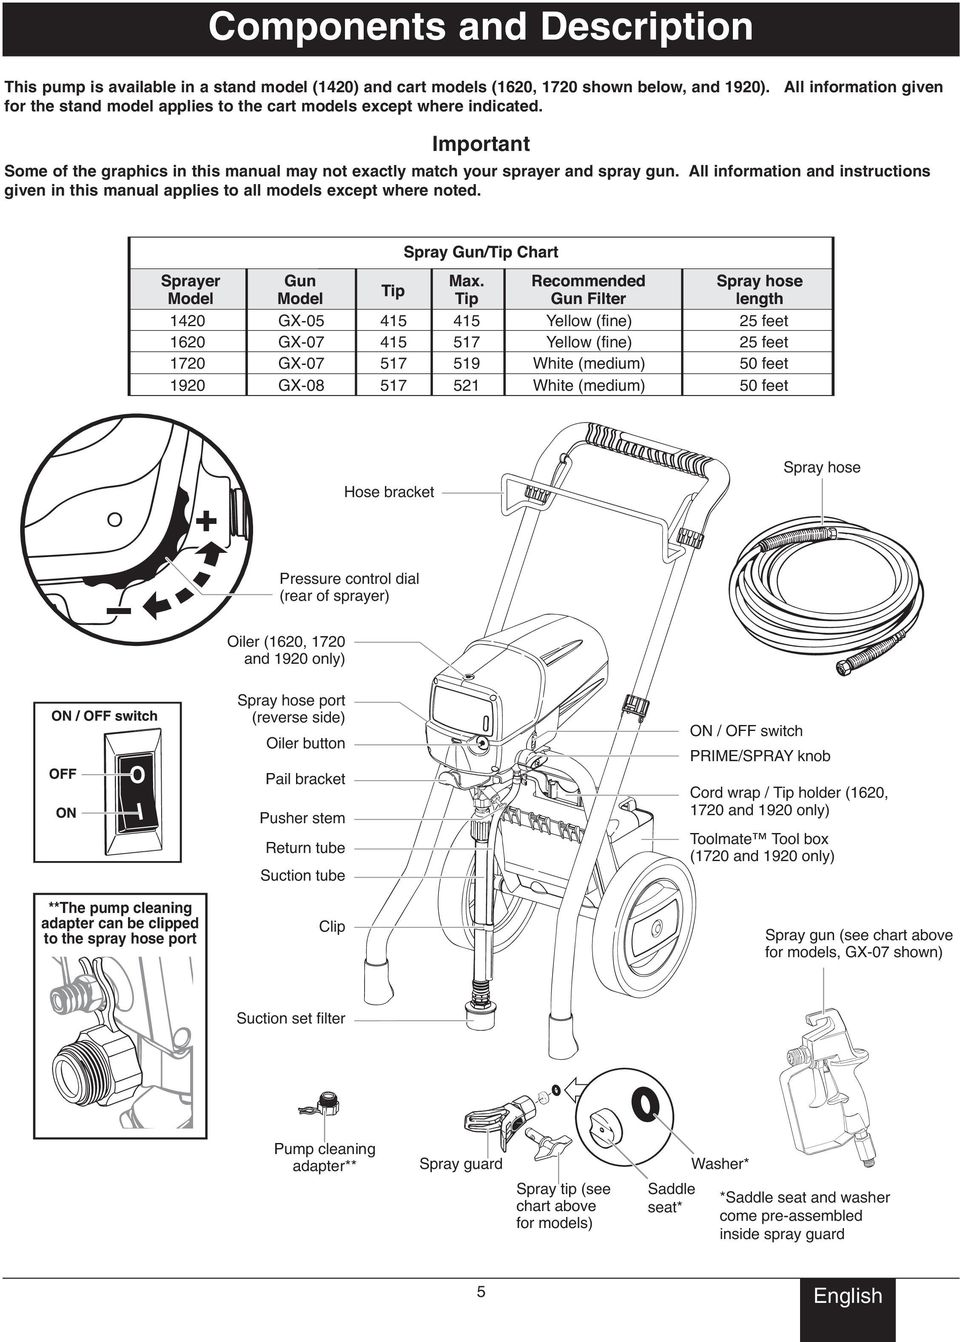 All information and instructions given in this manual applies to all models except where noted.